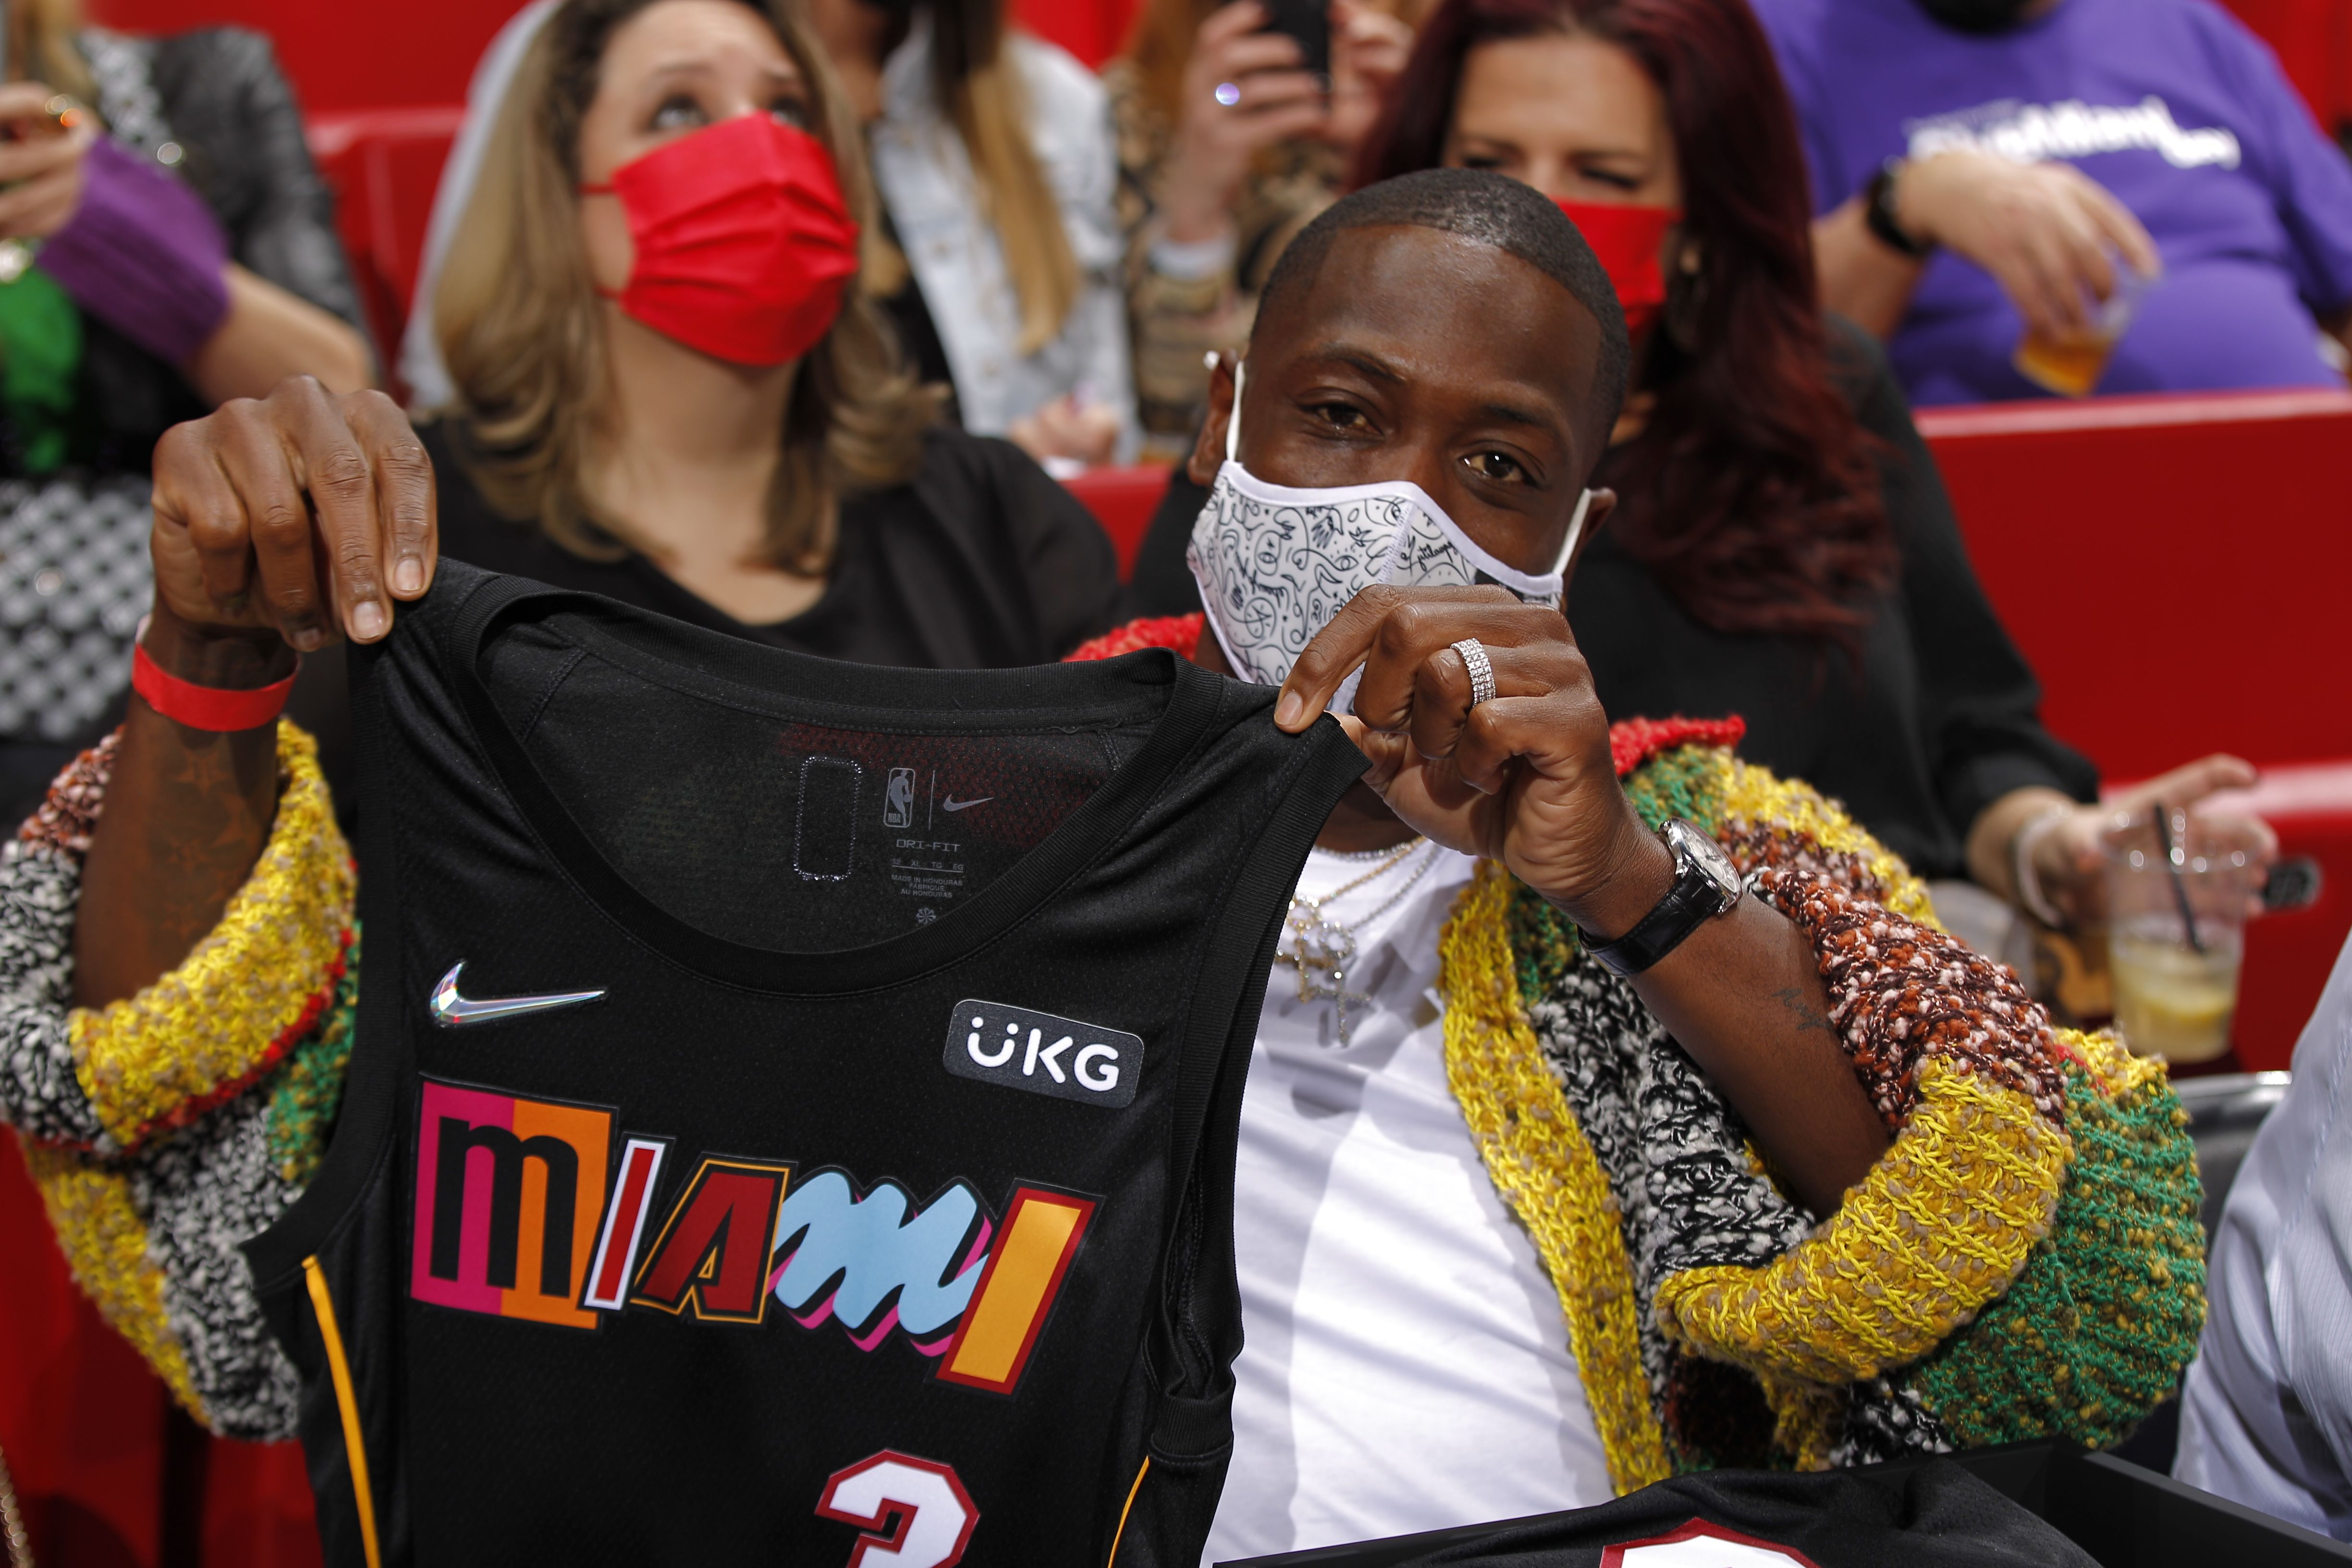 Miami Heat legend Dwyane Wade shows off the Heat's black Mashup jerseys (with "Miami" lettering on the front in varied styles from previous Heat jersey designs)